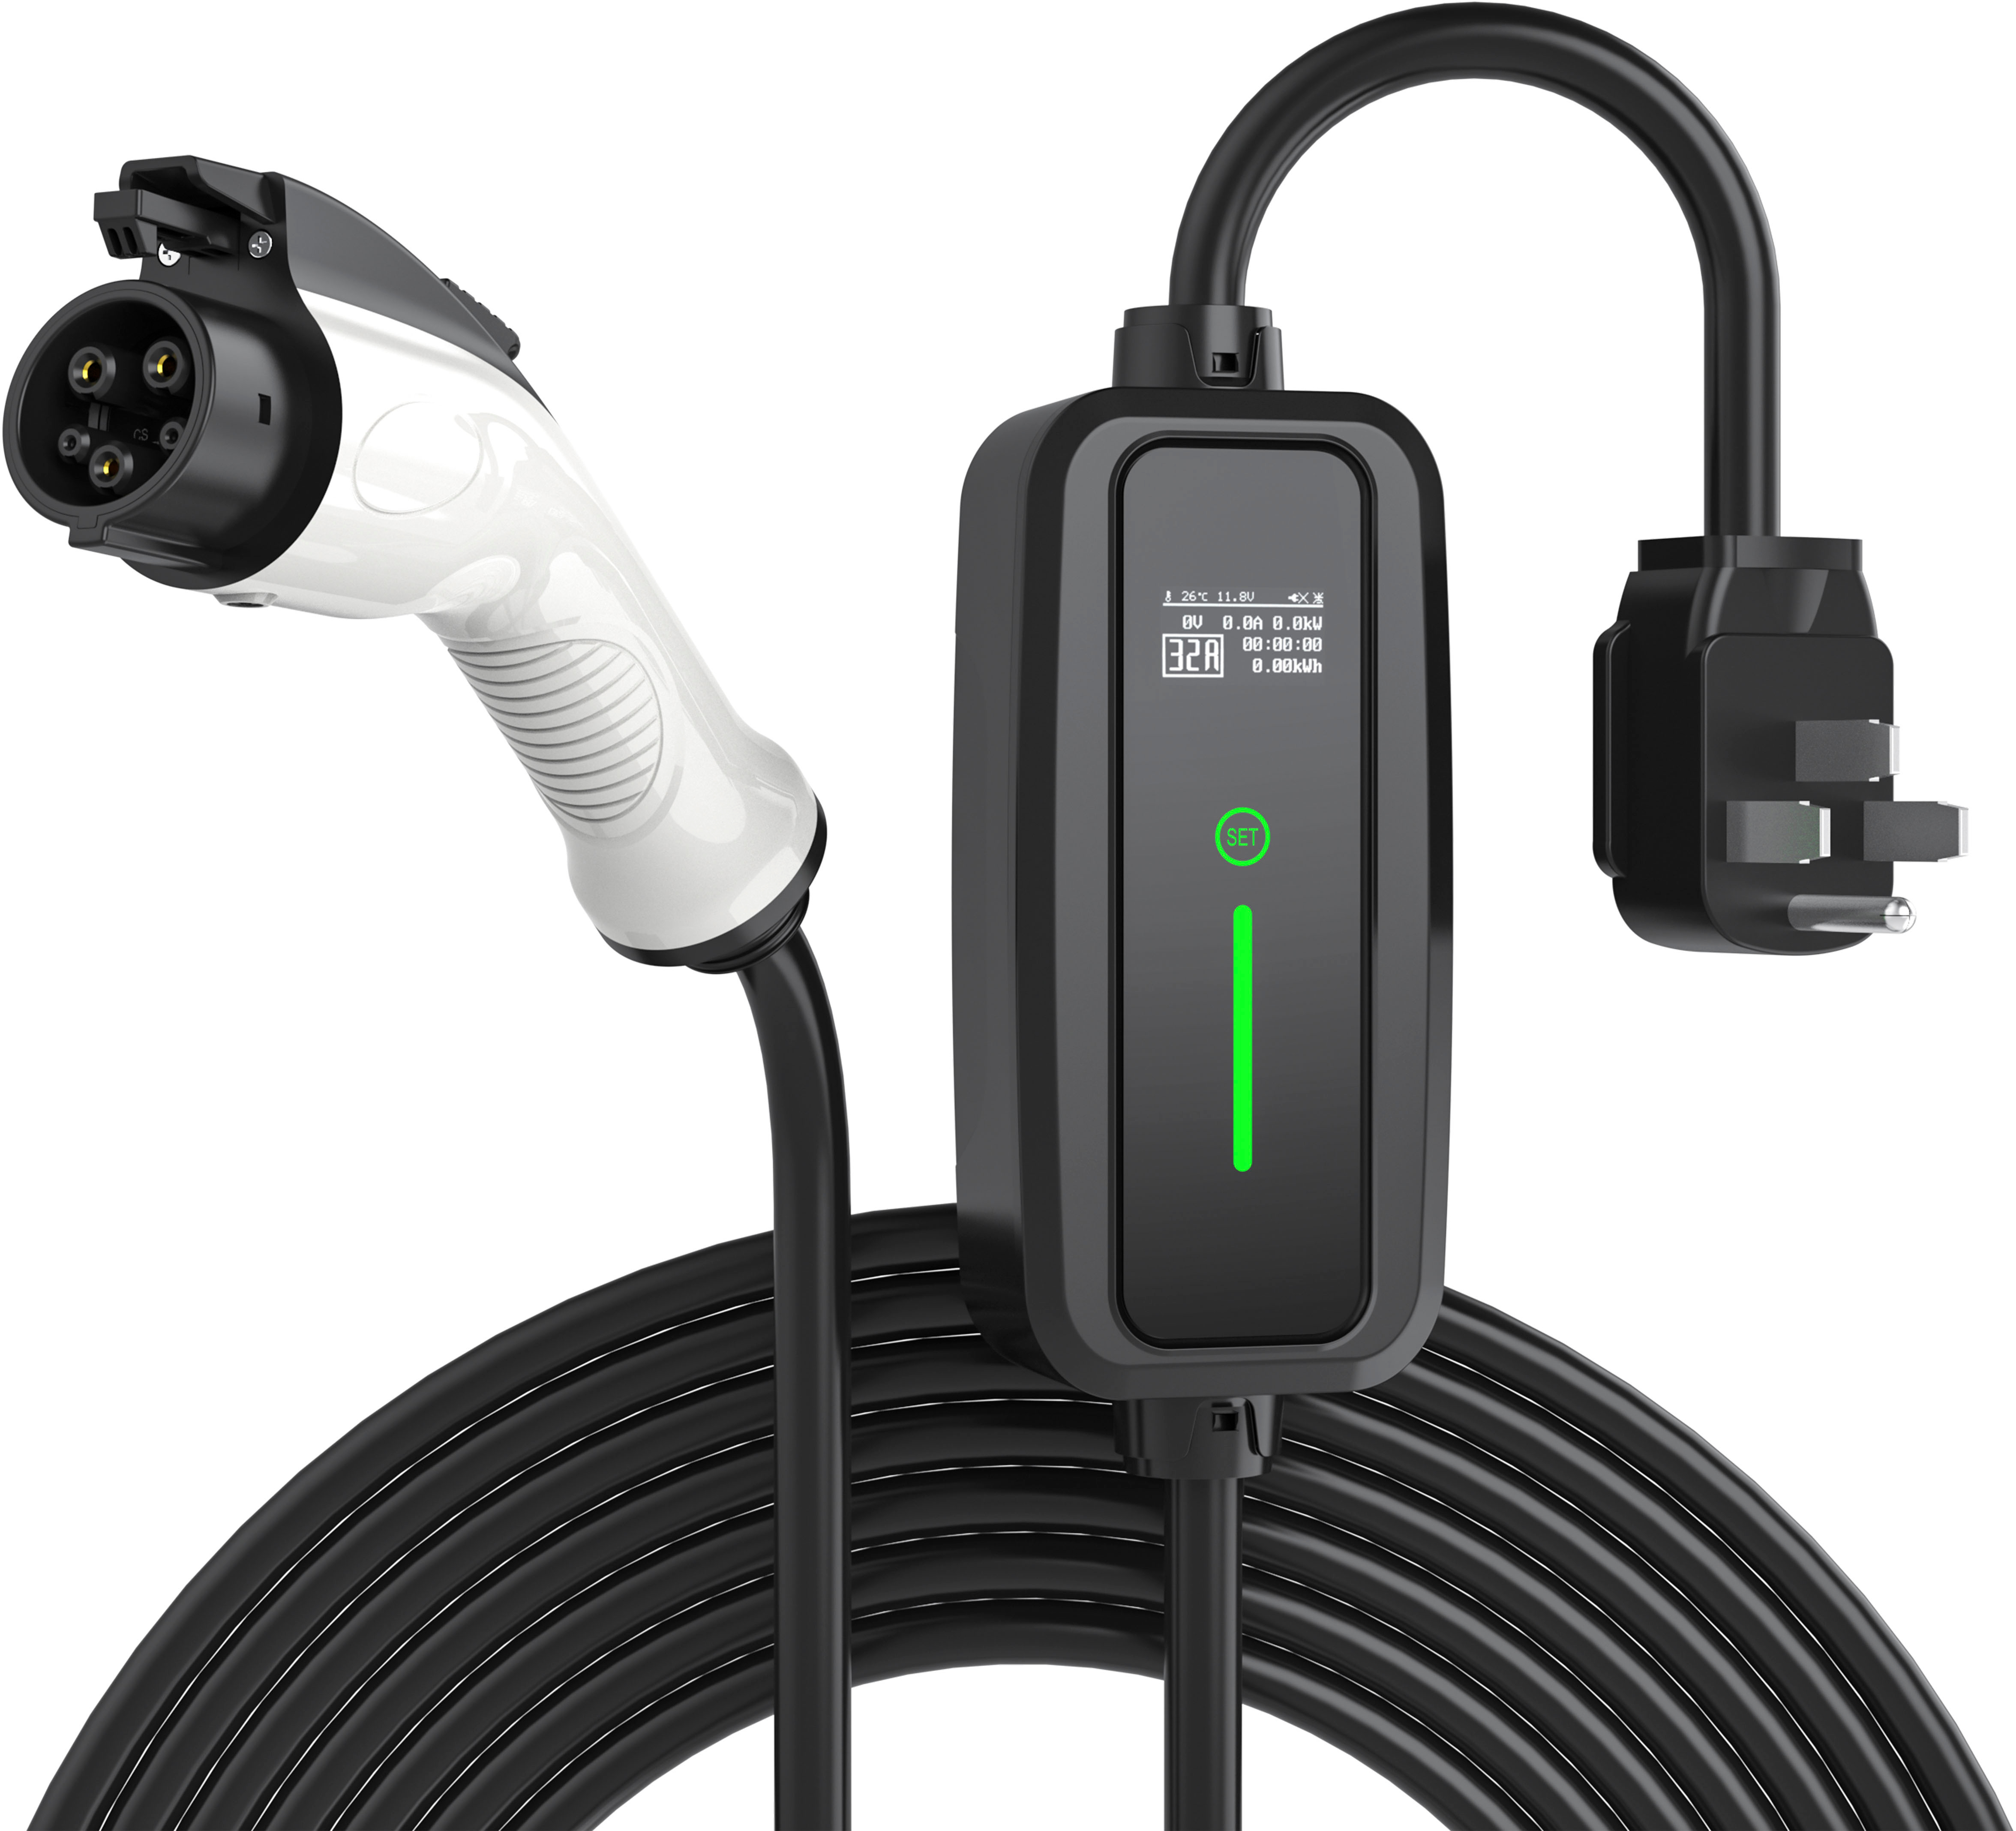 Rexing J1772 Level 2 NEMA 14-50 Portable Electric Vehicle (EV) Charger up  to 32A 17' Black BBY-J1772-PC - Best Buy